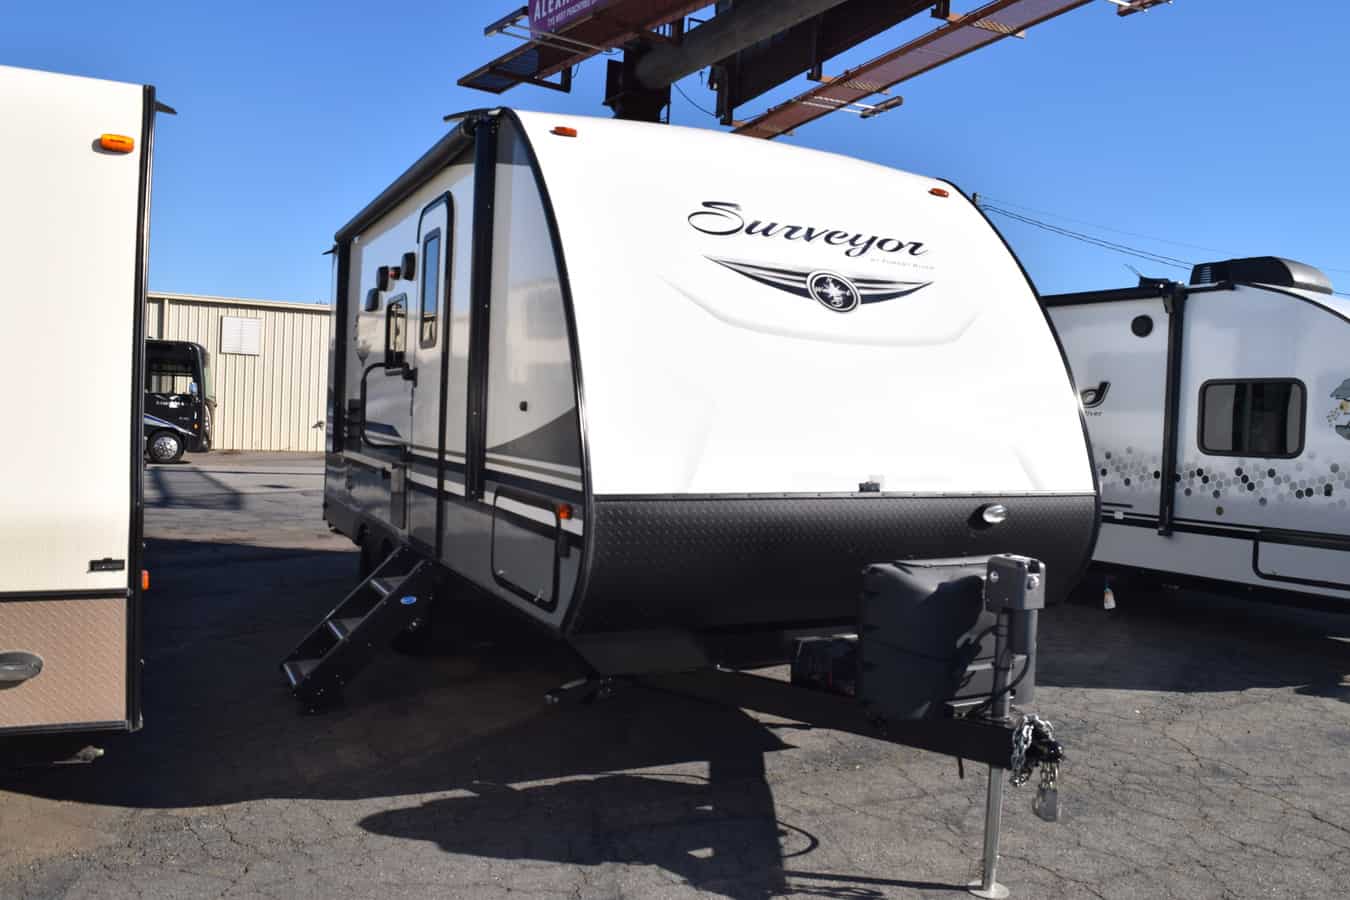 USED 2018 Forest River SURVEYOR 200MBLE